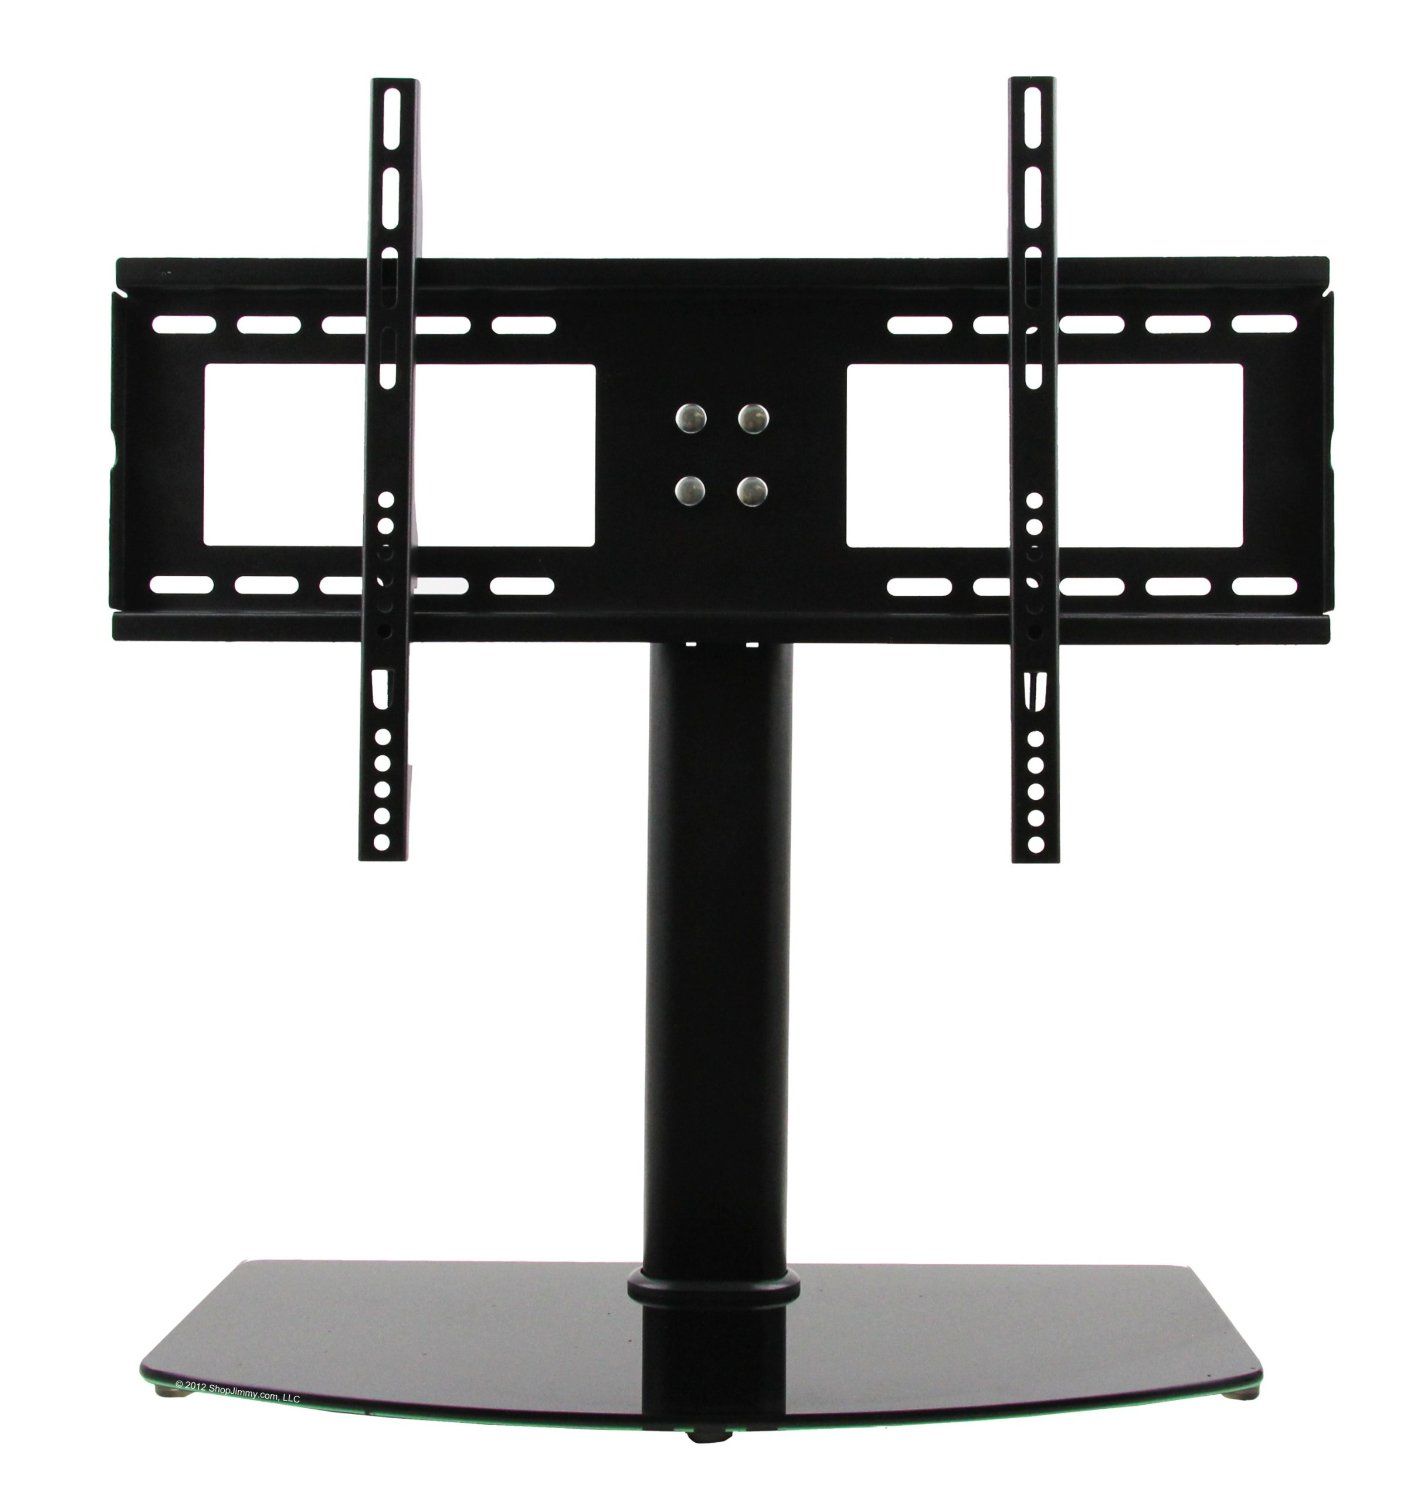 Cool Flat Screen Tv Stands With Mount – Homesfeed Throughout Wall Mounted Tv Cabinets For Flat Screens (View 11 of 15)